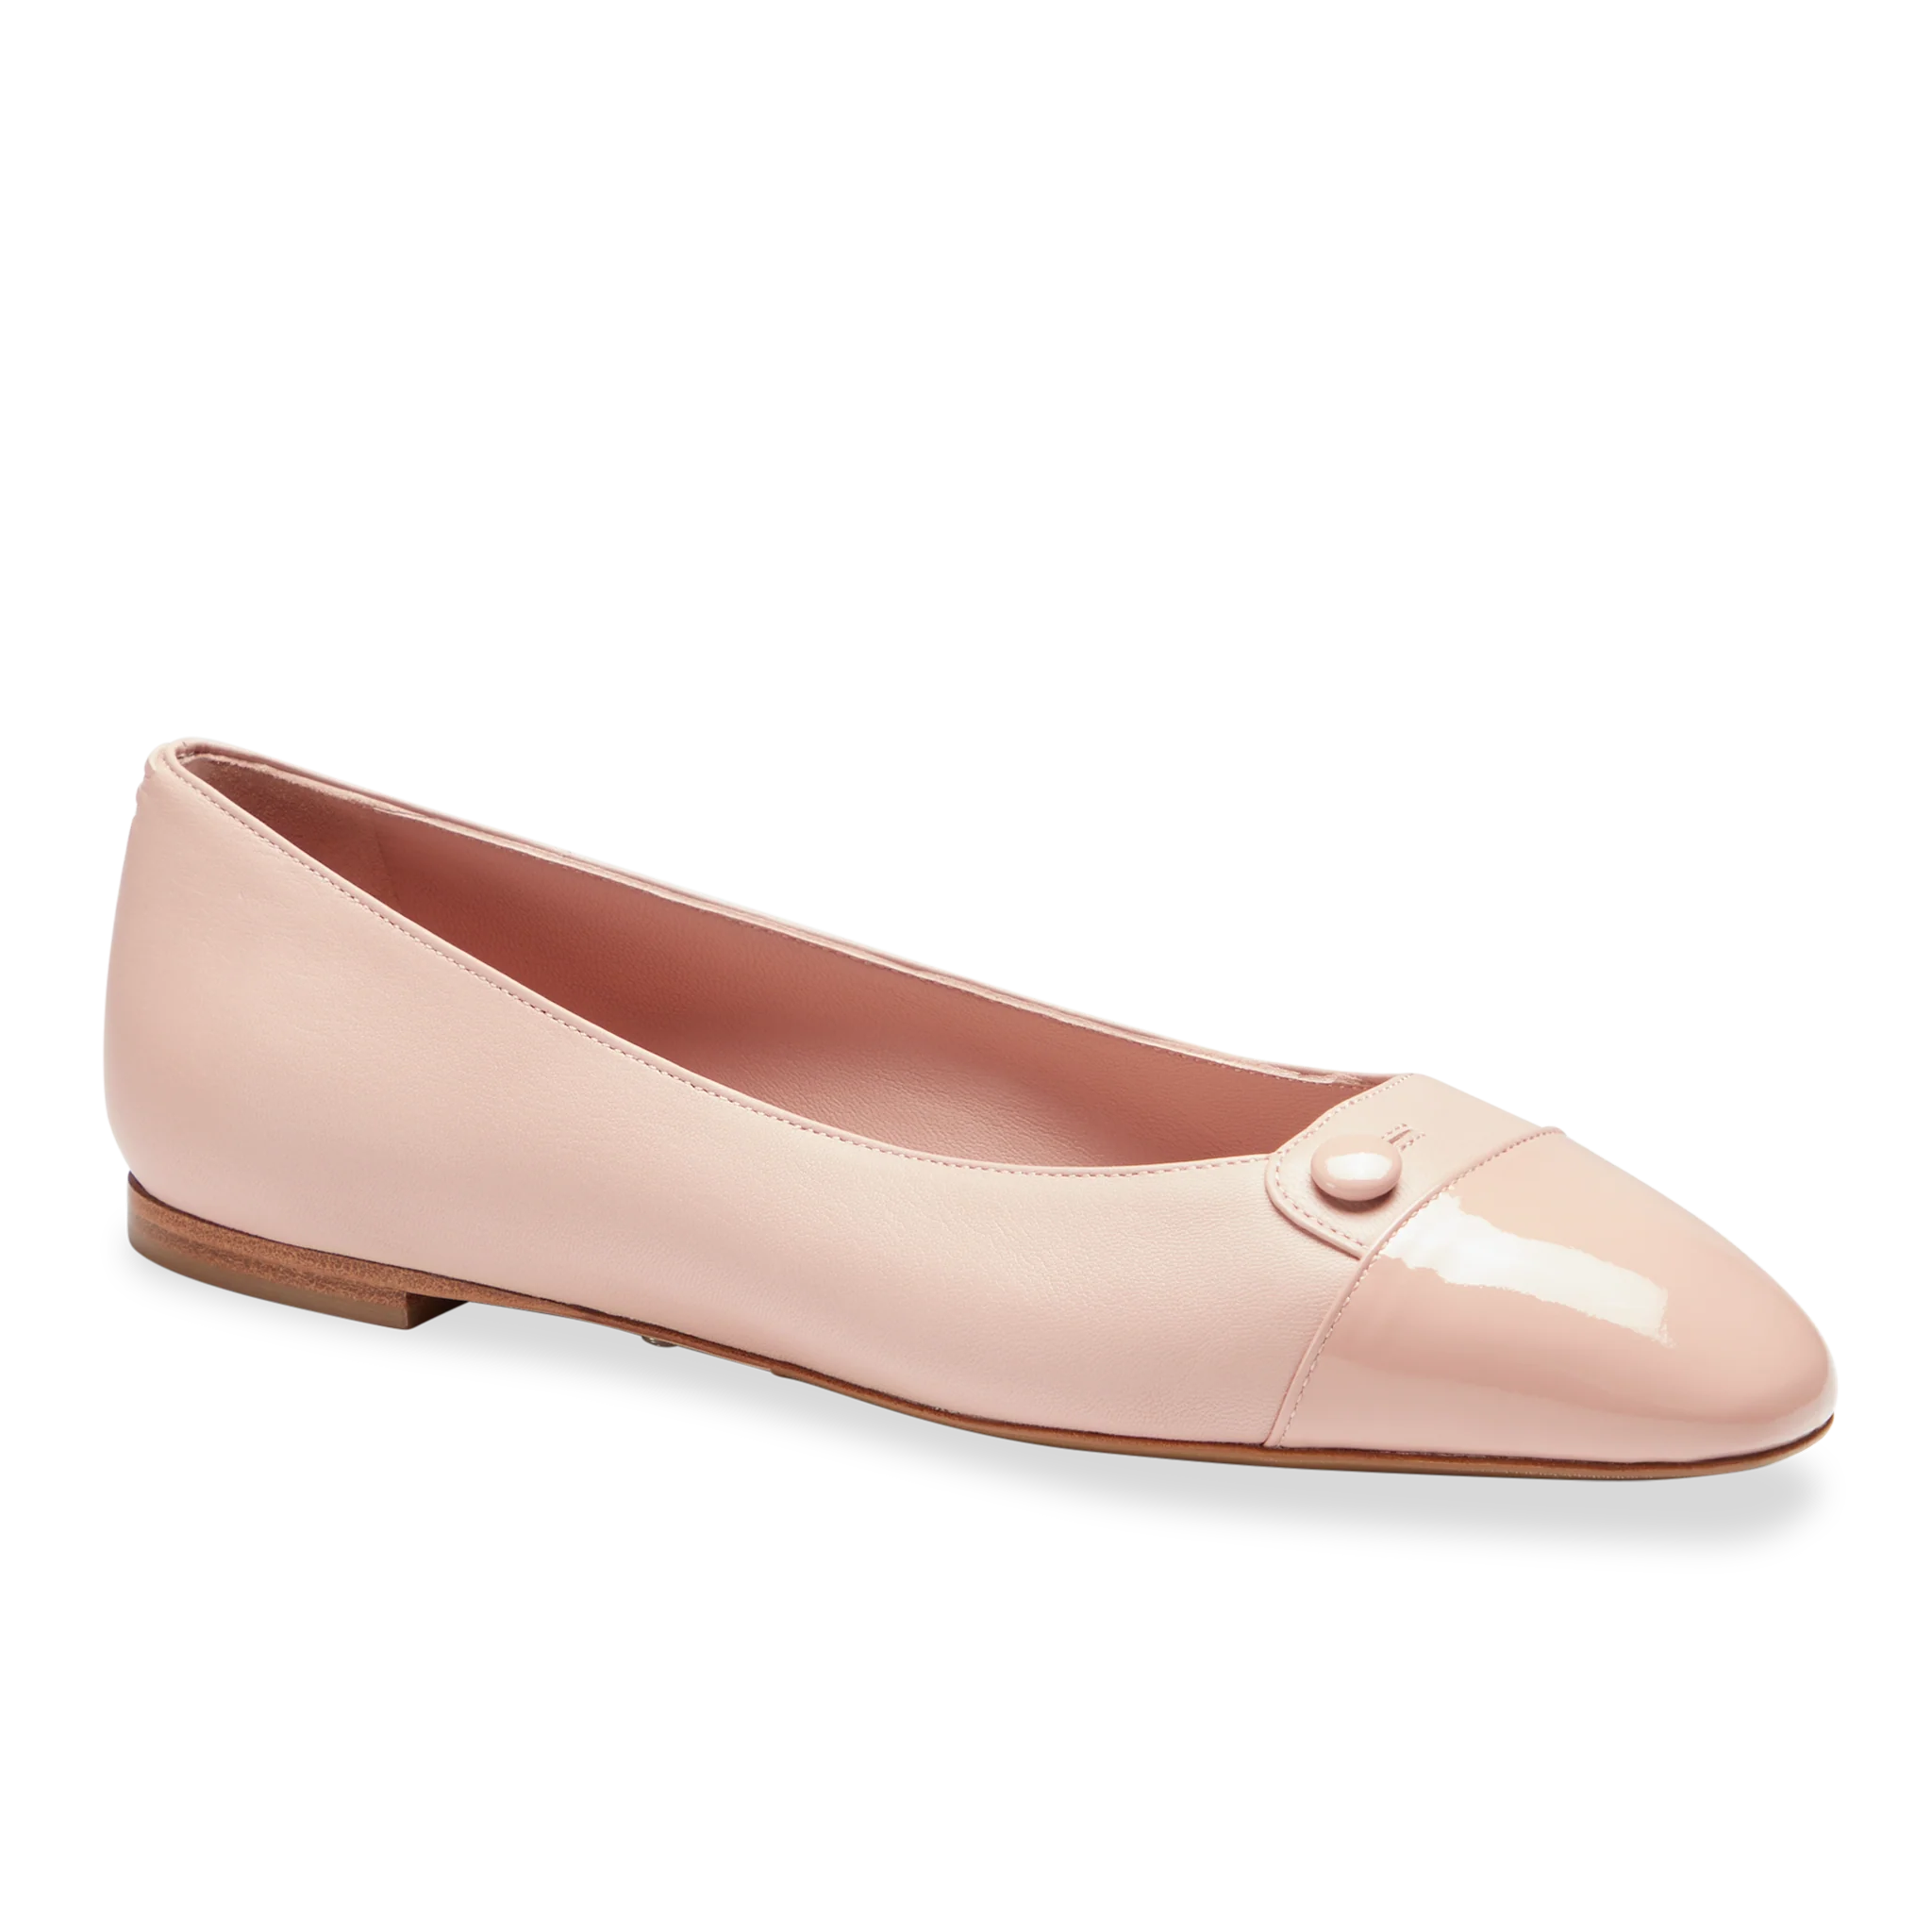 Dreamy Rose patent leather ballet flats